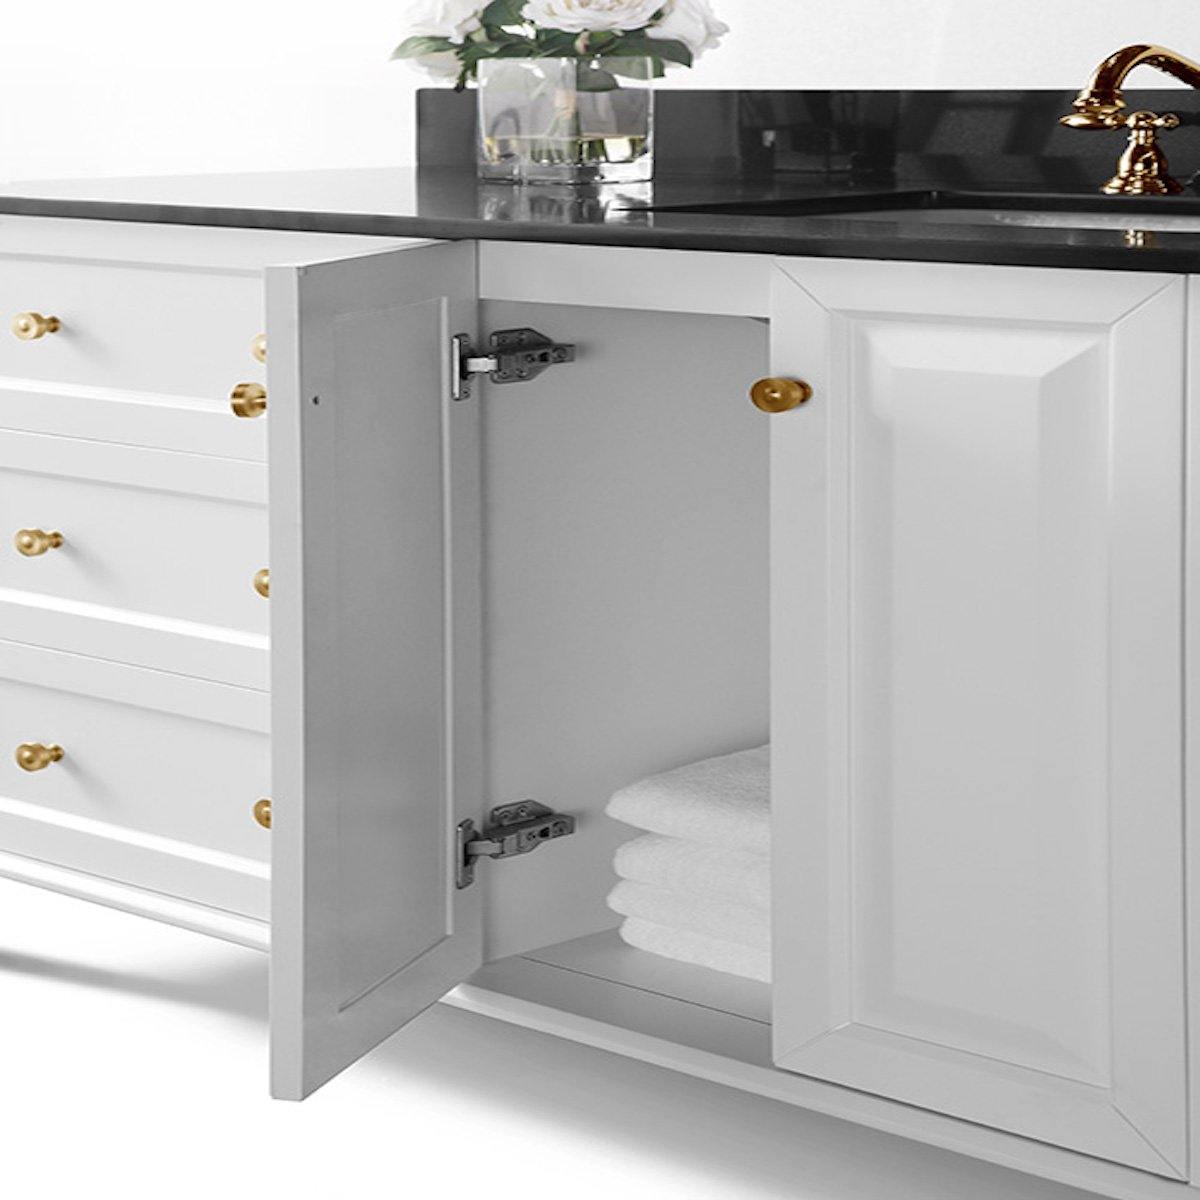 Ancerre Designs Hannah 48 Inch White Single Vanity with Right Basin and Gold Hardware Inside Cabinet